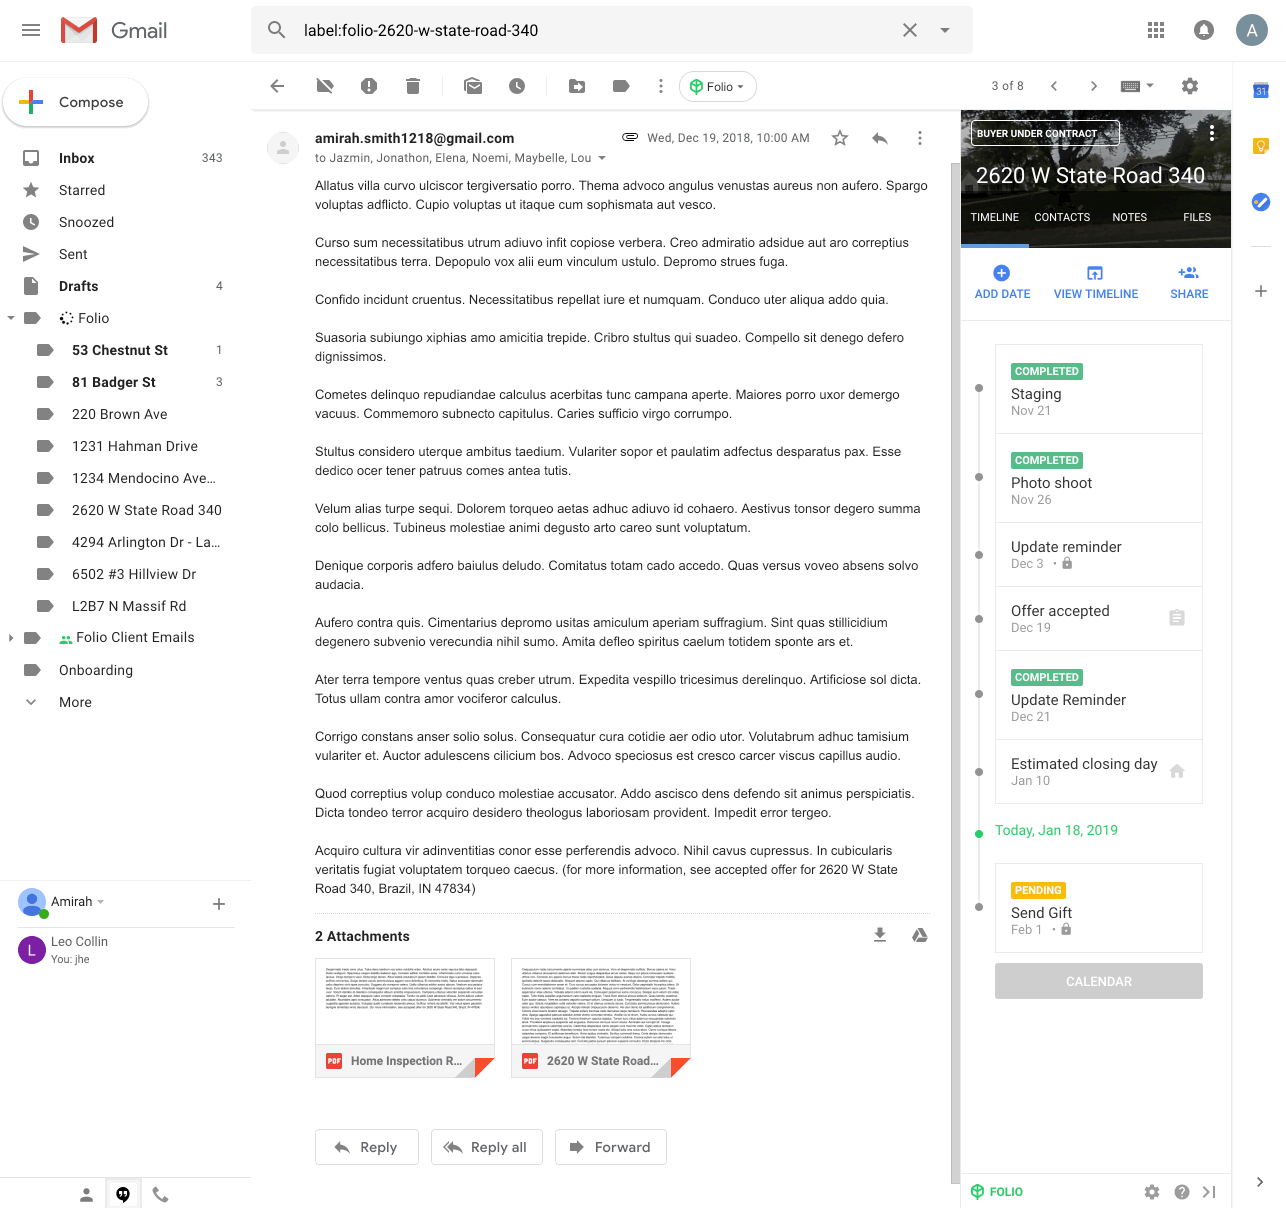 gmail-sidebar-overview.gif